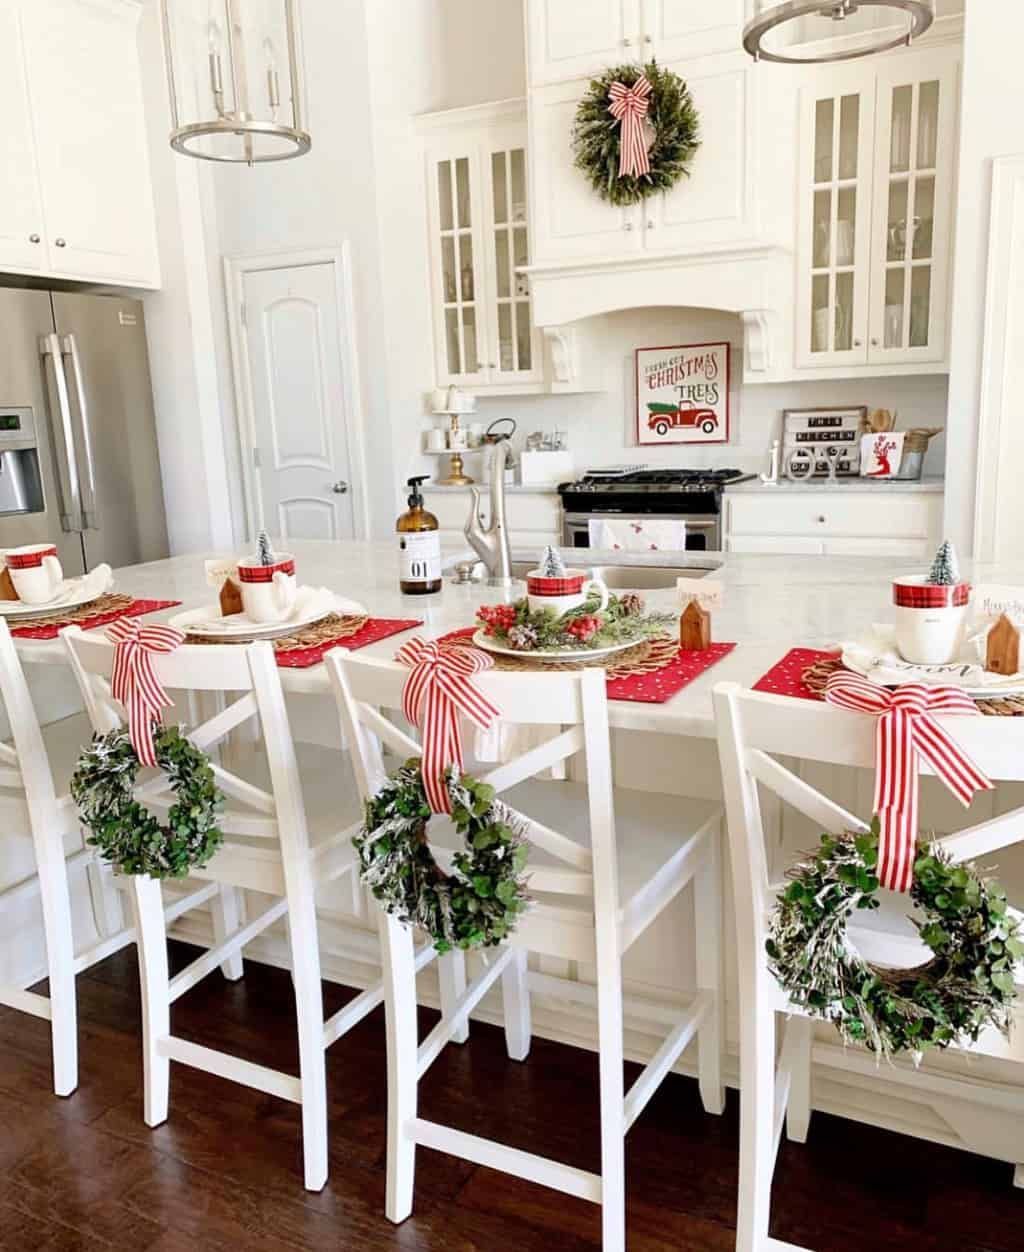 Christmas Decor We Are Drooling Over in 2020 -   21 christmas decorations living room ideas